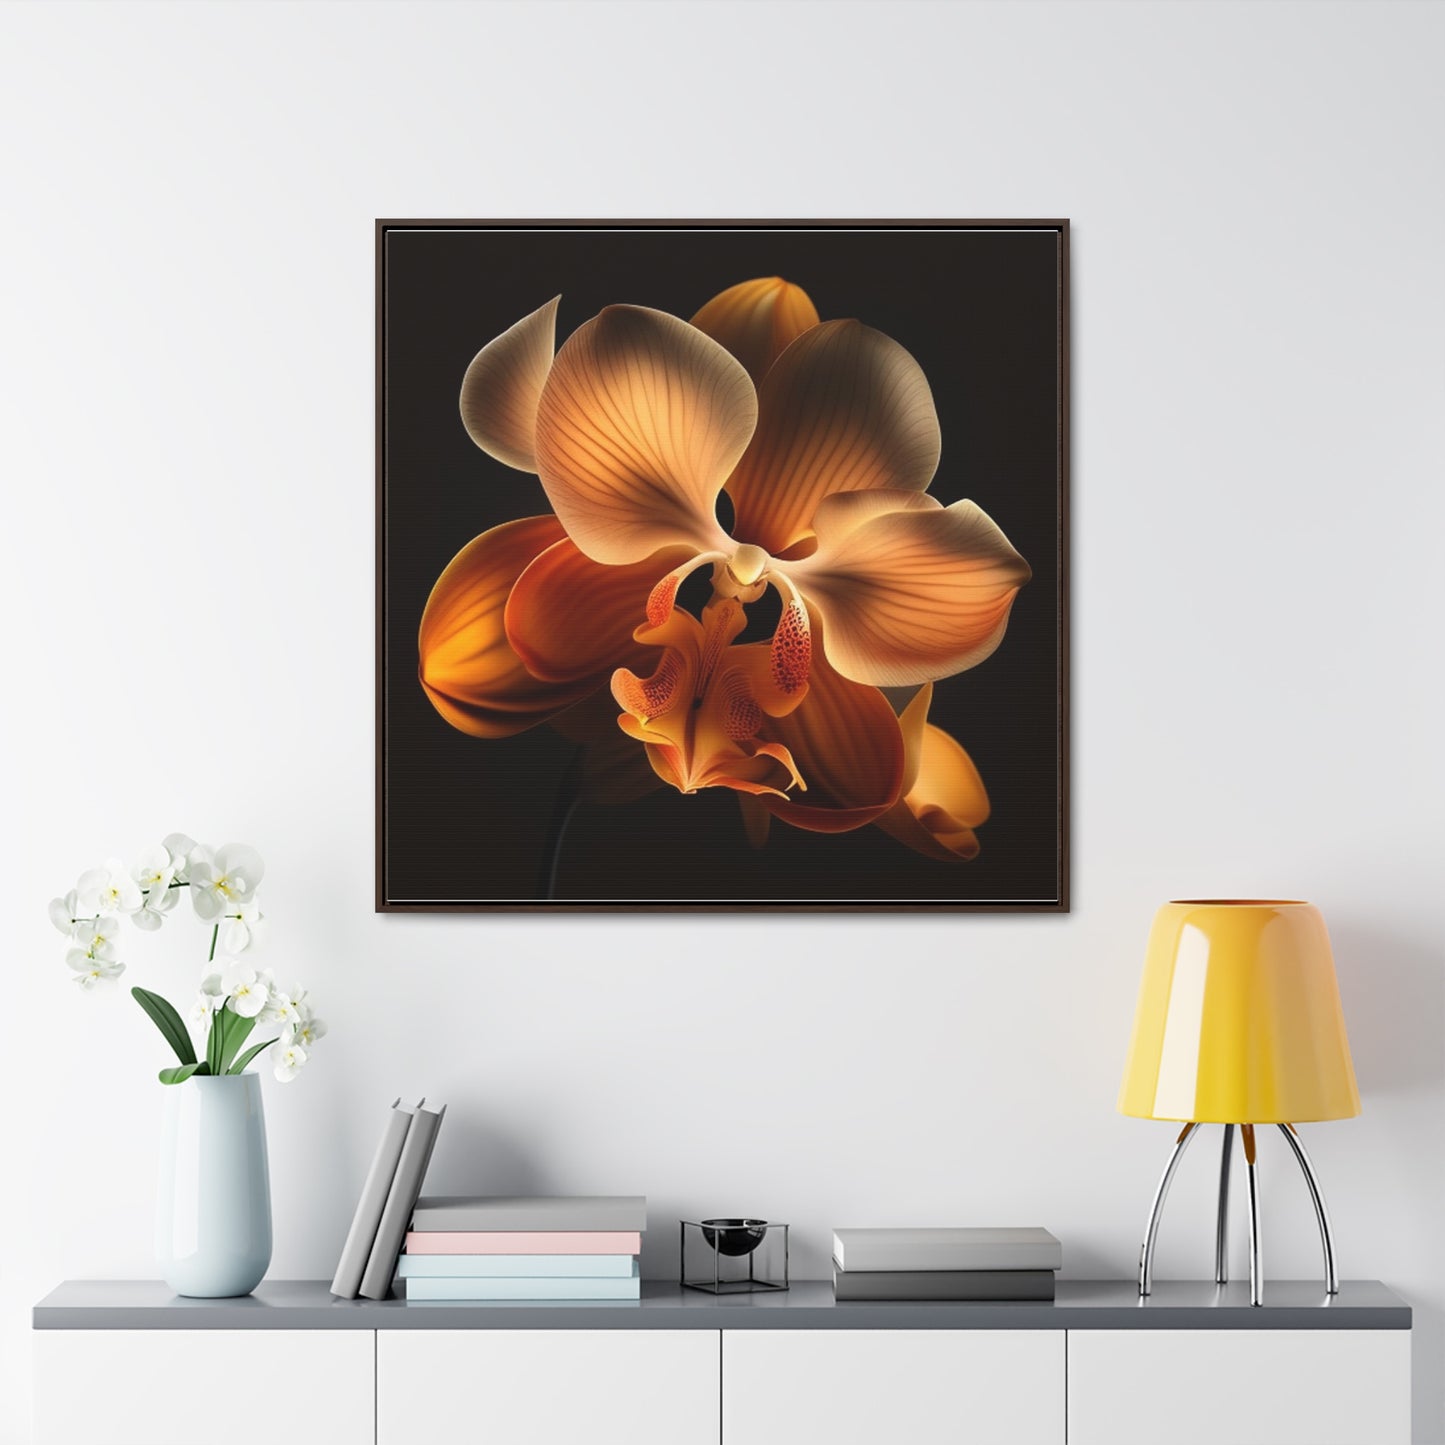 Gallery Canvas Wraps, Square Frame Orange Orchid 2